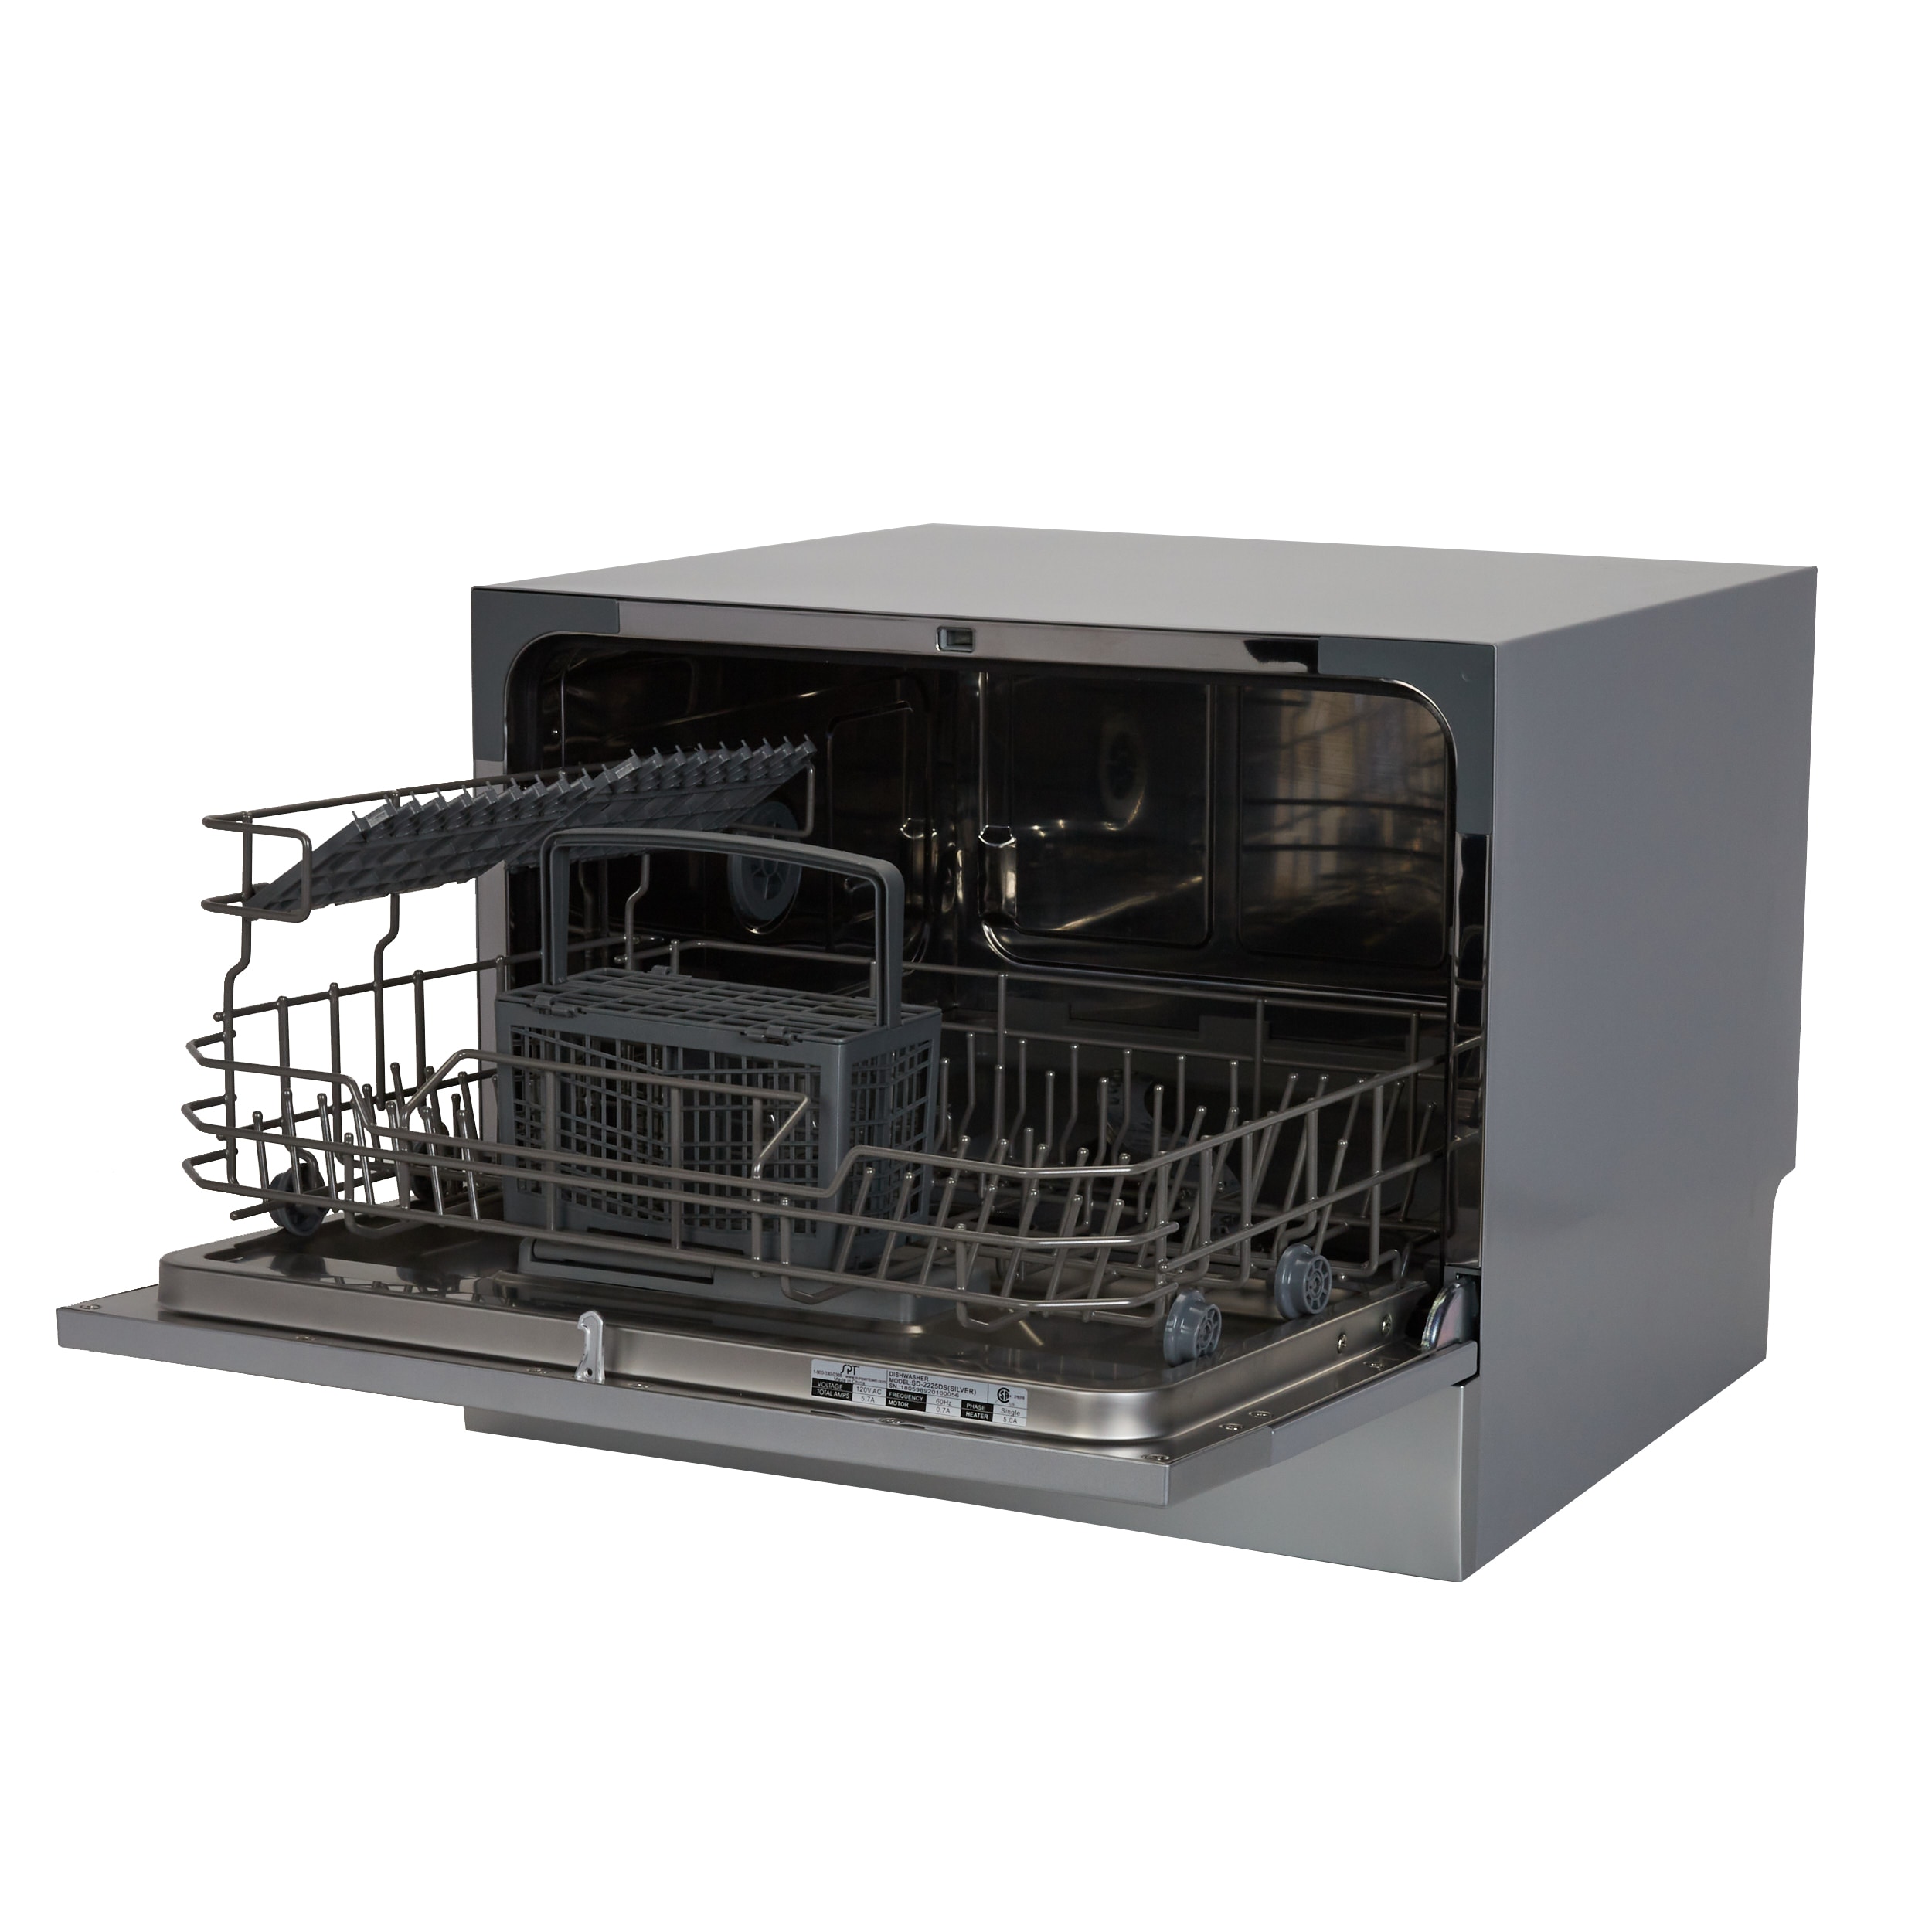 SPT Countertop Dishwasher with Delay Start & LED - Silver - SD-2225DSB